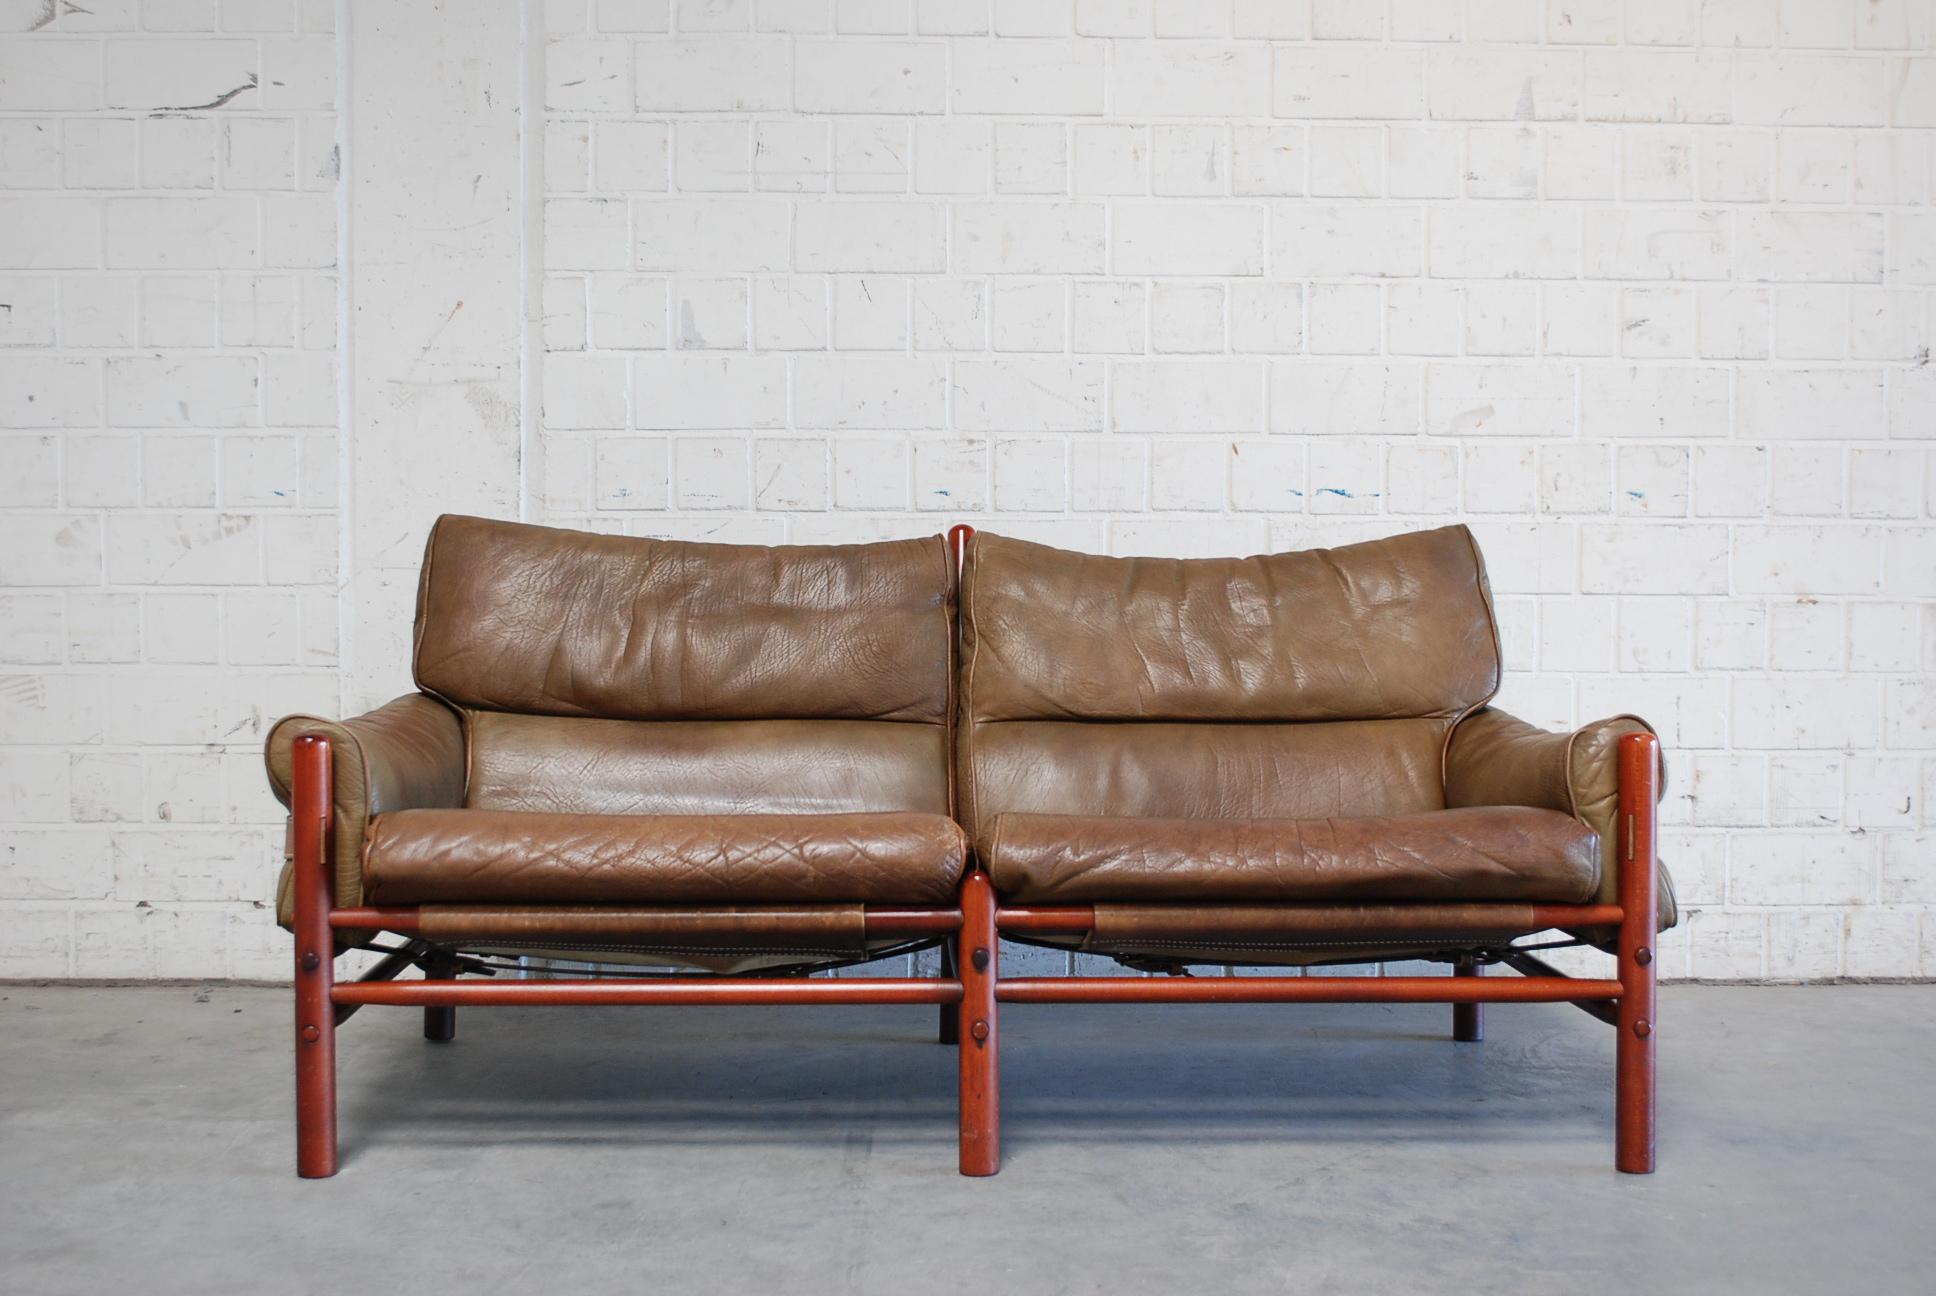 This brown olive leather Kontiki lounge sofa was designed and produced by Arne Norell in Sweden.
It is made from beech and stained in a teak color with original brown leather upholstery.
Great leather details in brass and belt and thick leather.
 